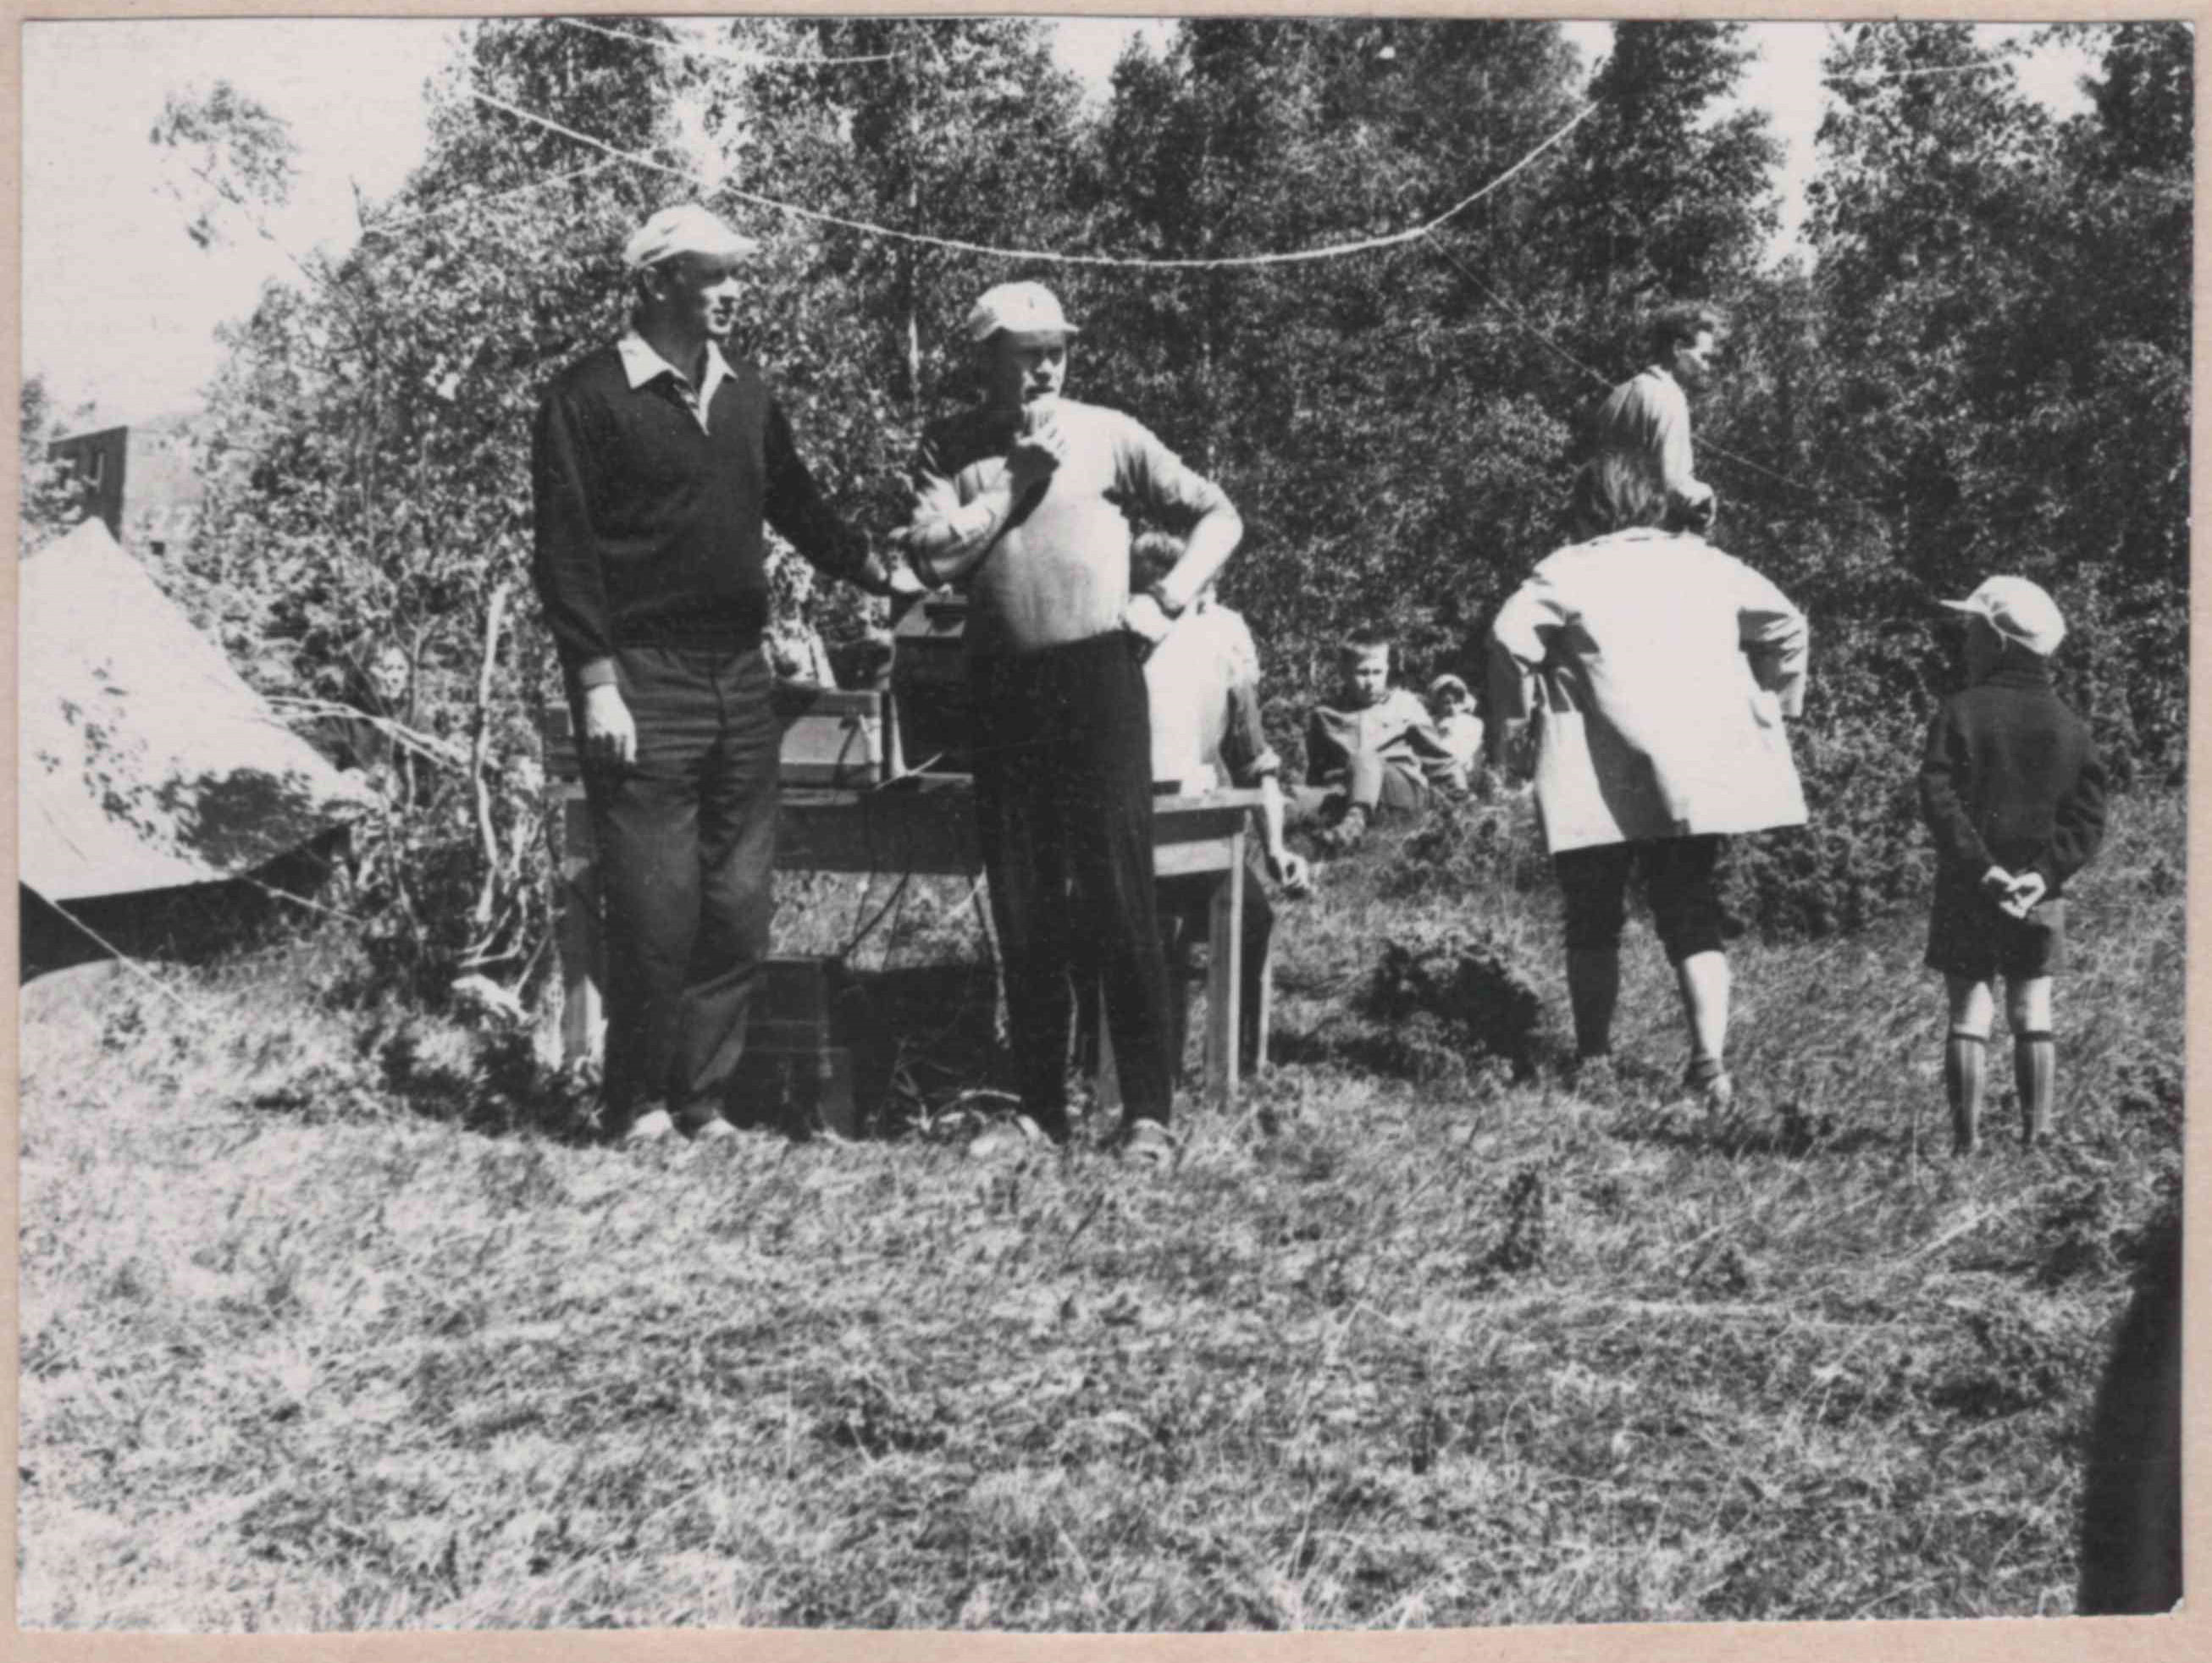 First summer days in Kukeranna. Tarmo Narusk and Hugo Kliss at the information table at the camp